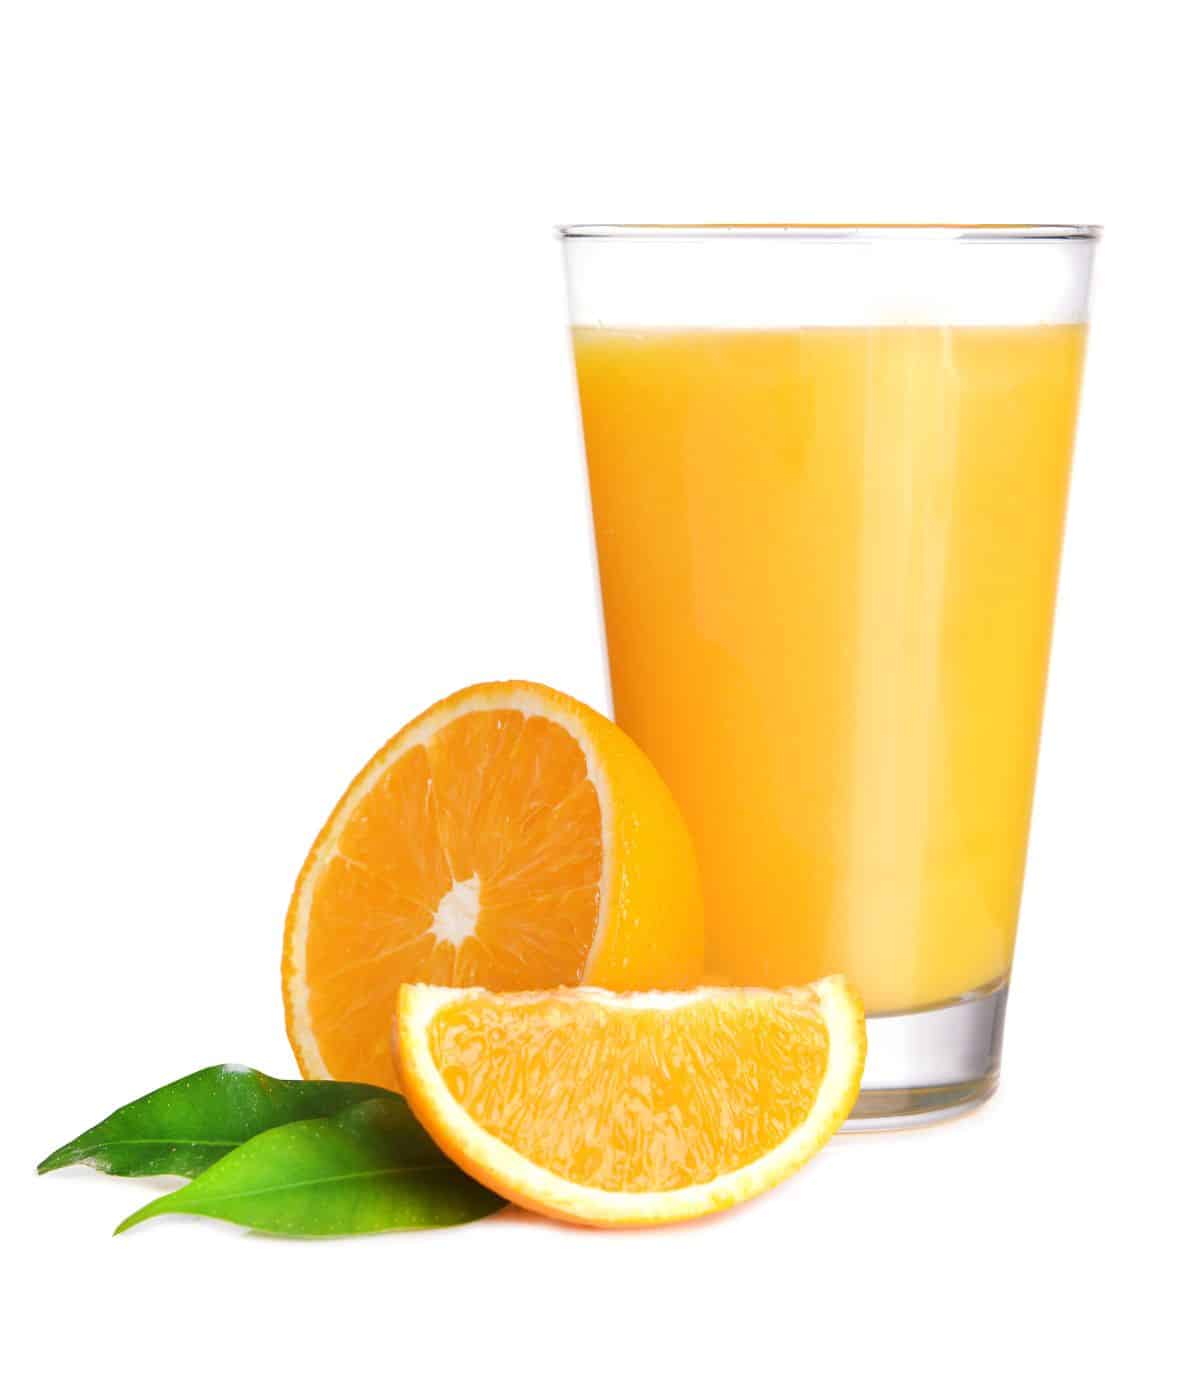 Orange juice in a glass on a white background.